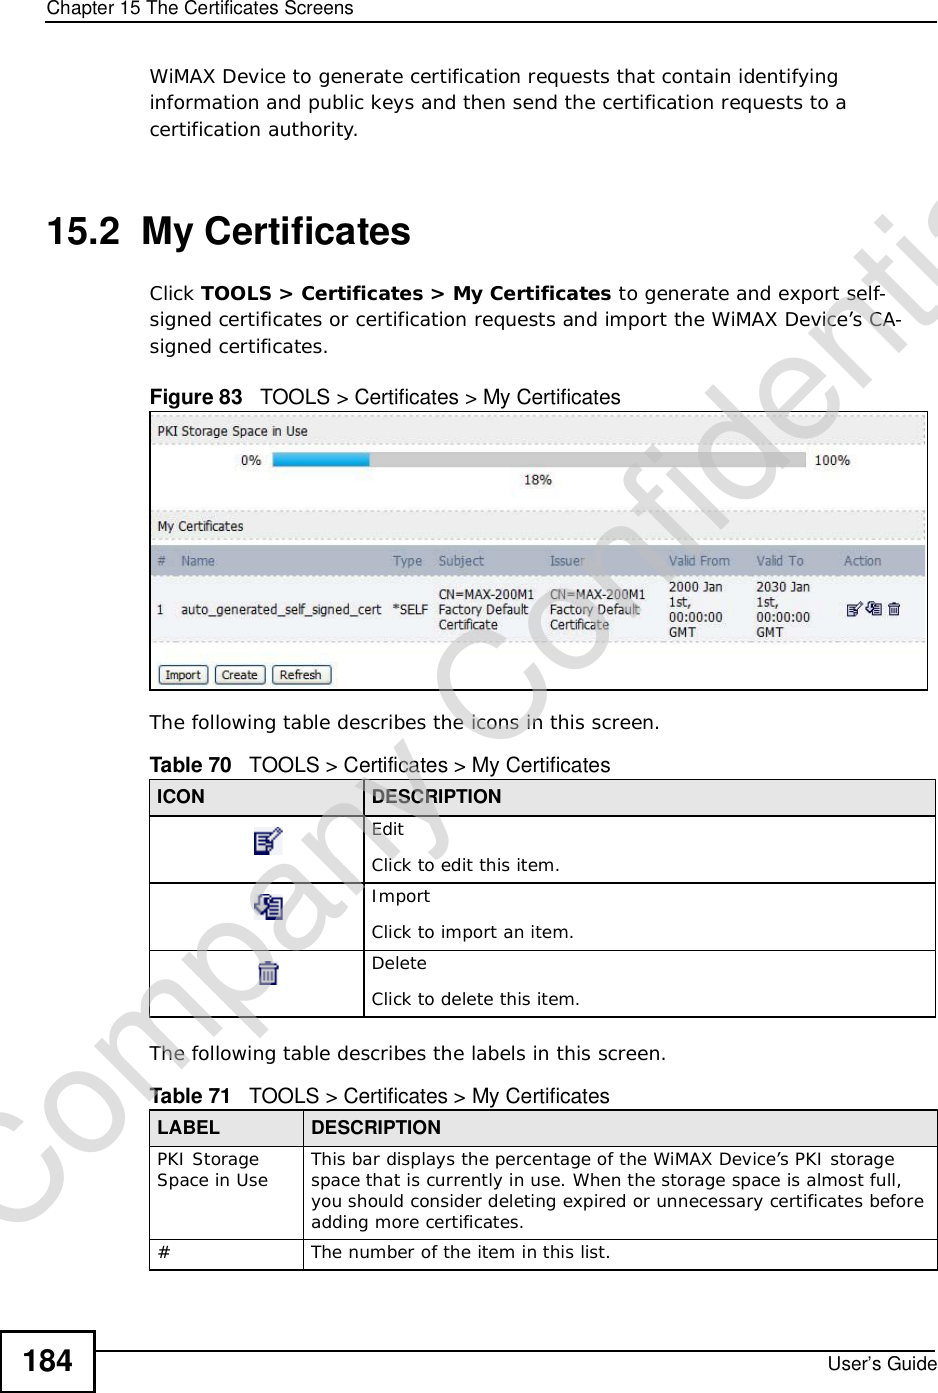 Chapter 15The Certificates ScreensUser’s Guide184WiMAX Device to generate certification requests that contain identifying information and public keys and then send the certification requests to a certification authority. 15.2  My CertificatesClick TOOLS &gt; Certificates &gt; My Certificates to generate and export self-signed certificates or certification requests and import the WiMAX Device’s CA-signed certificates.Figure 83   TOOLS &gt; Certificates &gt; My Certificates      The following table describes the icons in this screen.The following table describes the labels in this screen. Table 70   TOOLS &gt; Certificates &gt; My CertificatesICON DESCRIPTIONEditClick to edit this item.ImportClick to import an item.DeleteClick to delete this item.Table 71   TOOLS &gt; Certificates &gt; My CertificatesLABEL DESCRIPTIONPKI Storage Space in Use This bar displays the percentage of the WiMAX Device’s PKI storage space that is currently in use. When the storage space is almost full, you should consider deleting expired or unnecessary certificates before adding more certificates.#The number of the item in this list.Company Confidential